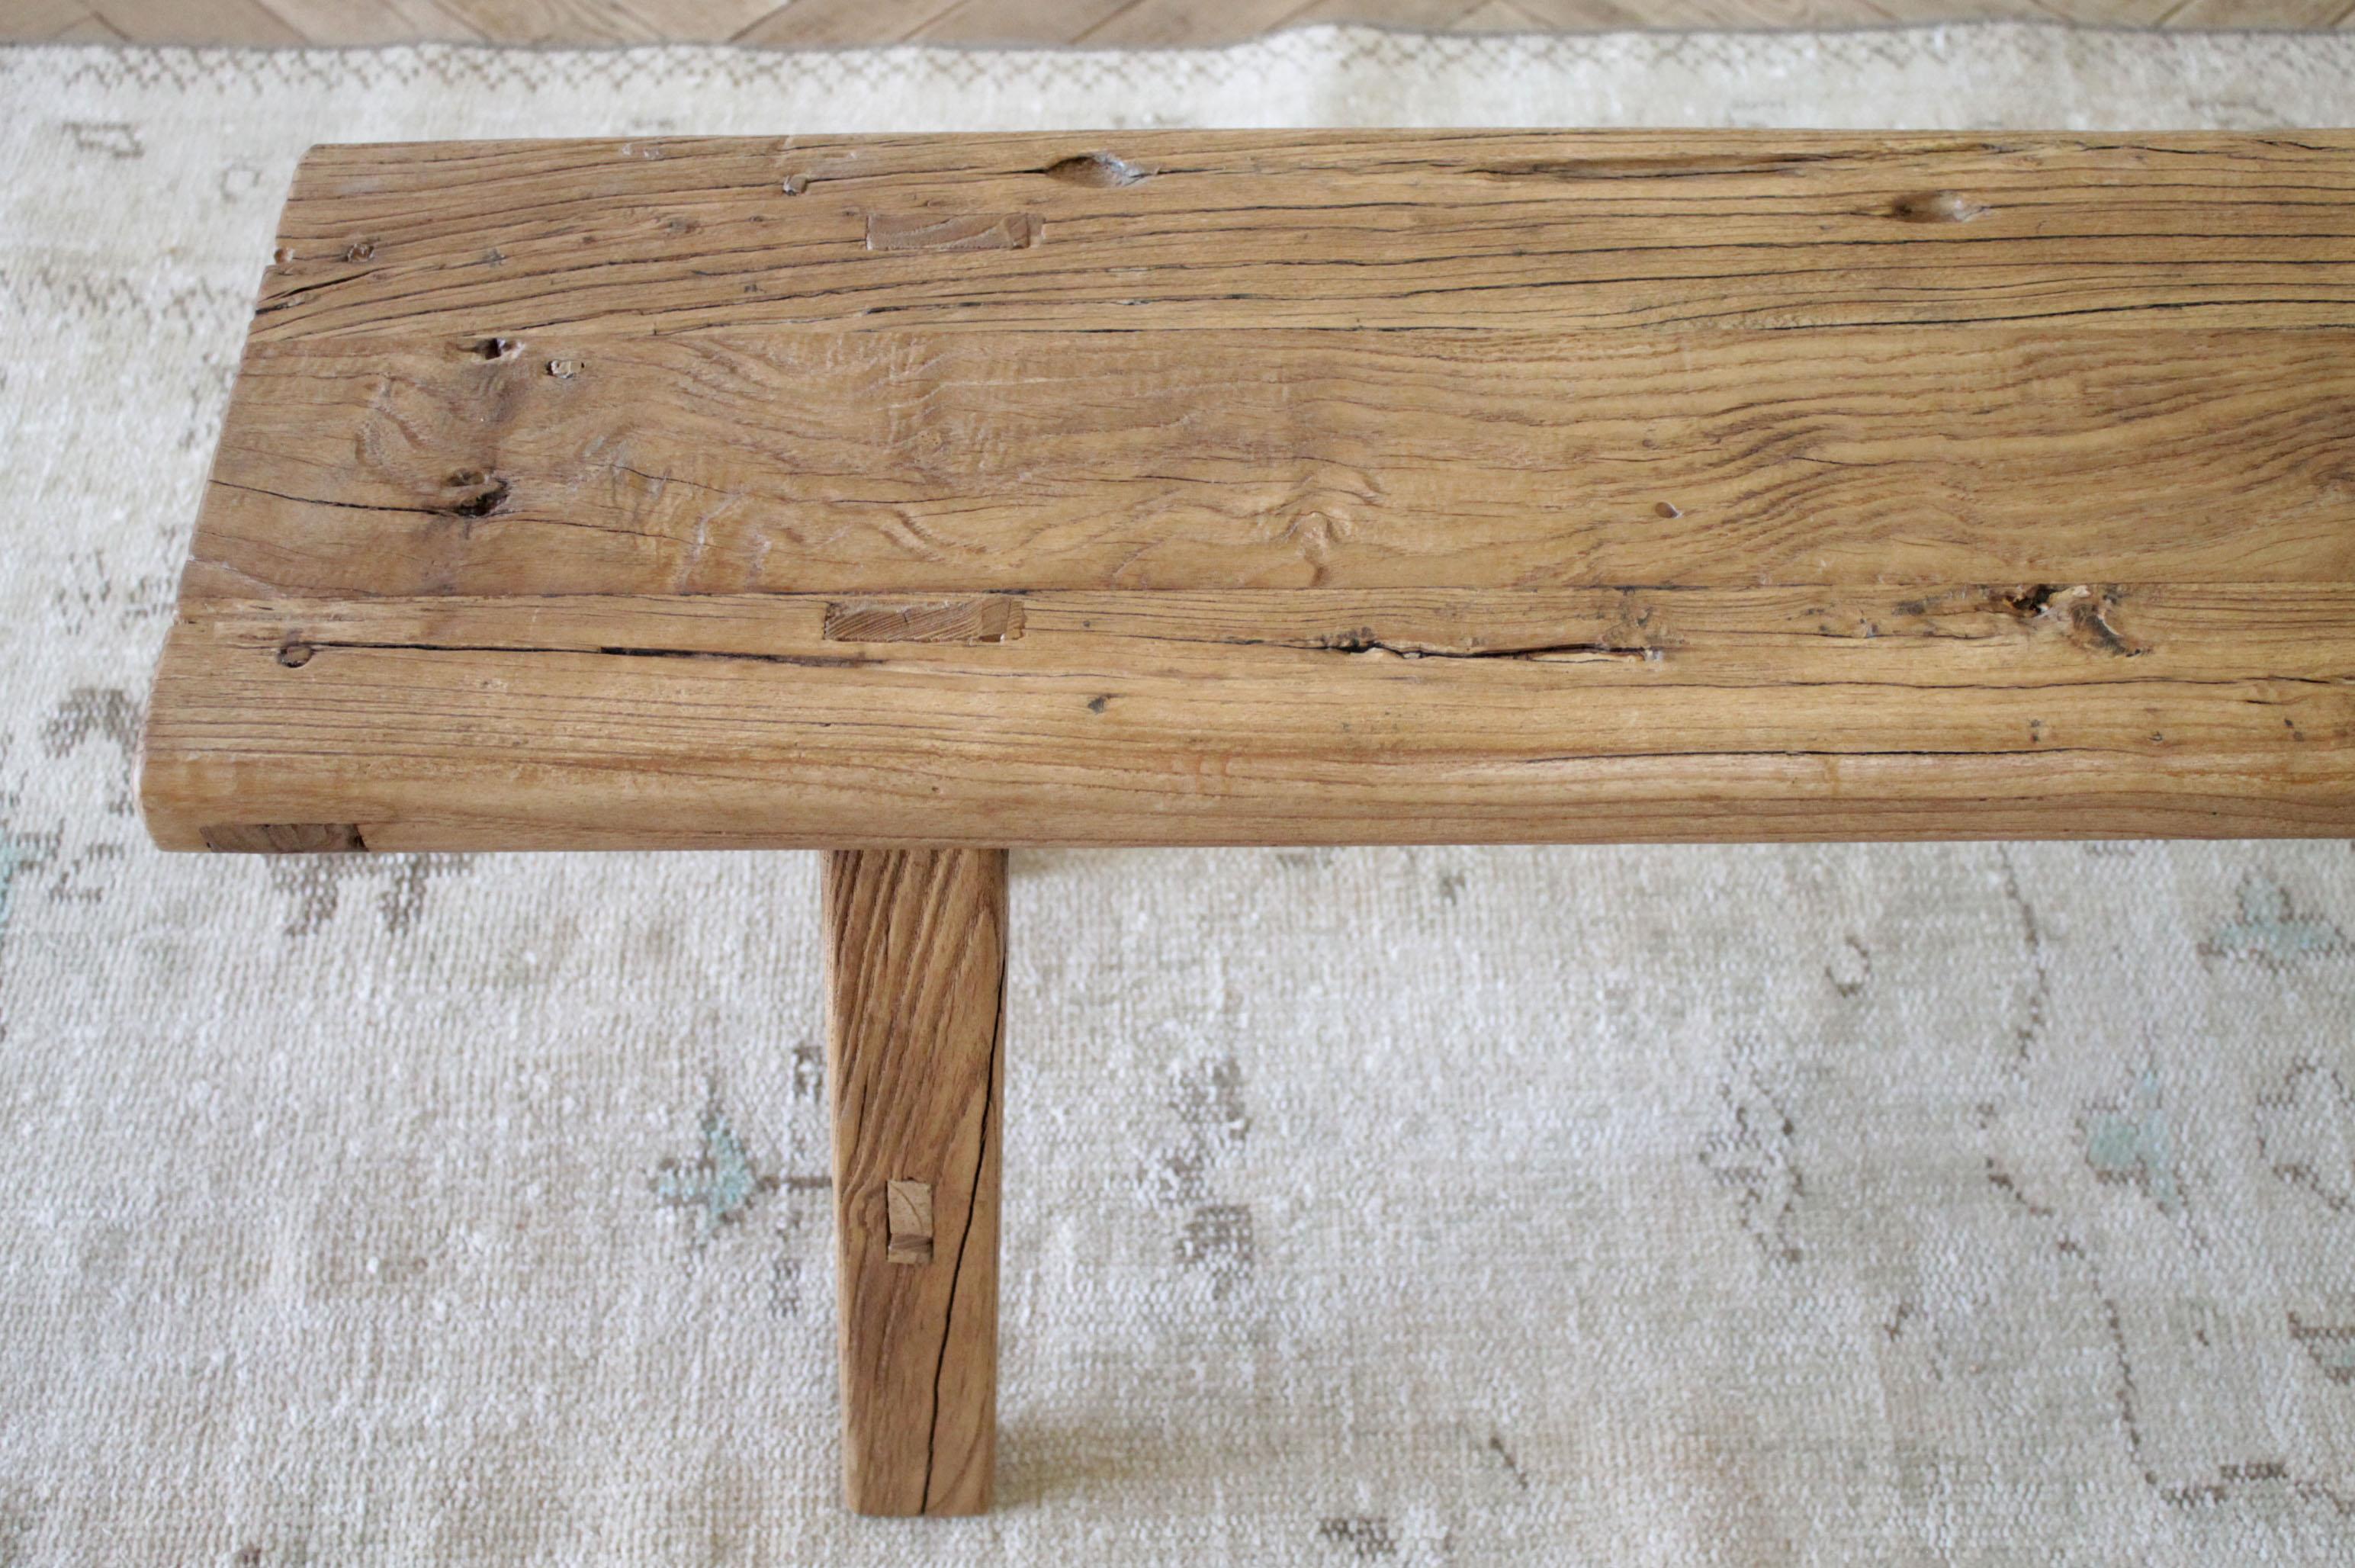 Vintage reclaimed natural elm wood bench with wide seat and beautiful patina, great for end of the bed, living room or dining room. Made from old reclaimed elmwood timbers.
Measures: 63